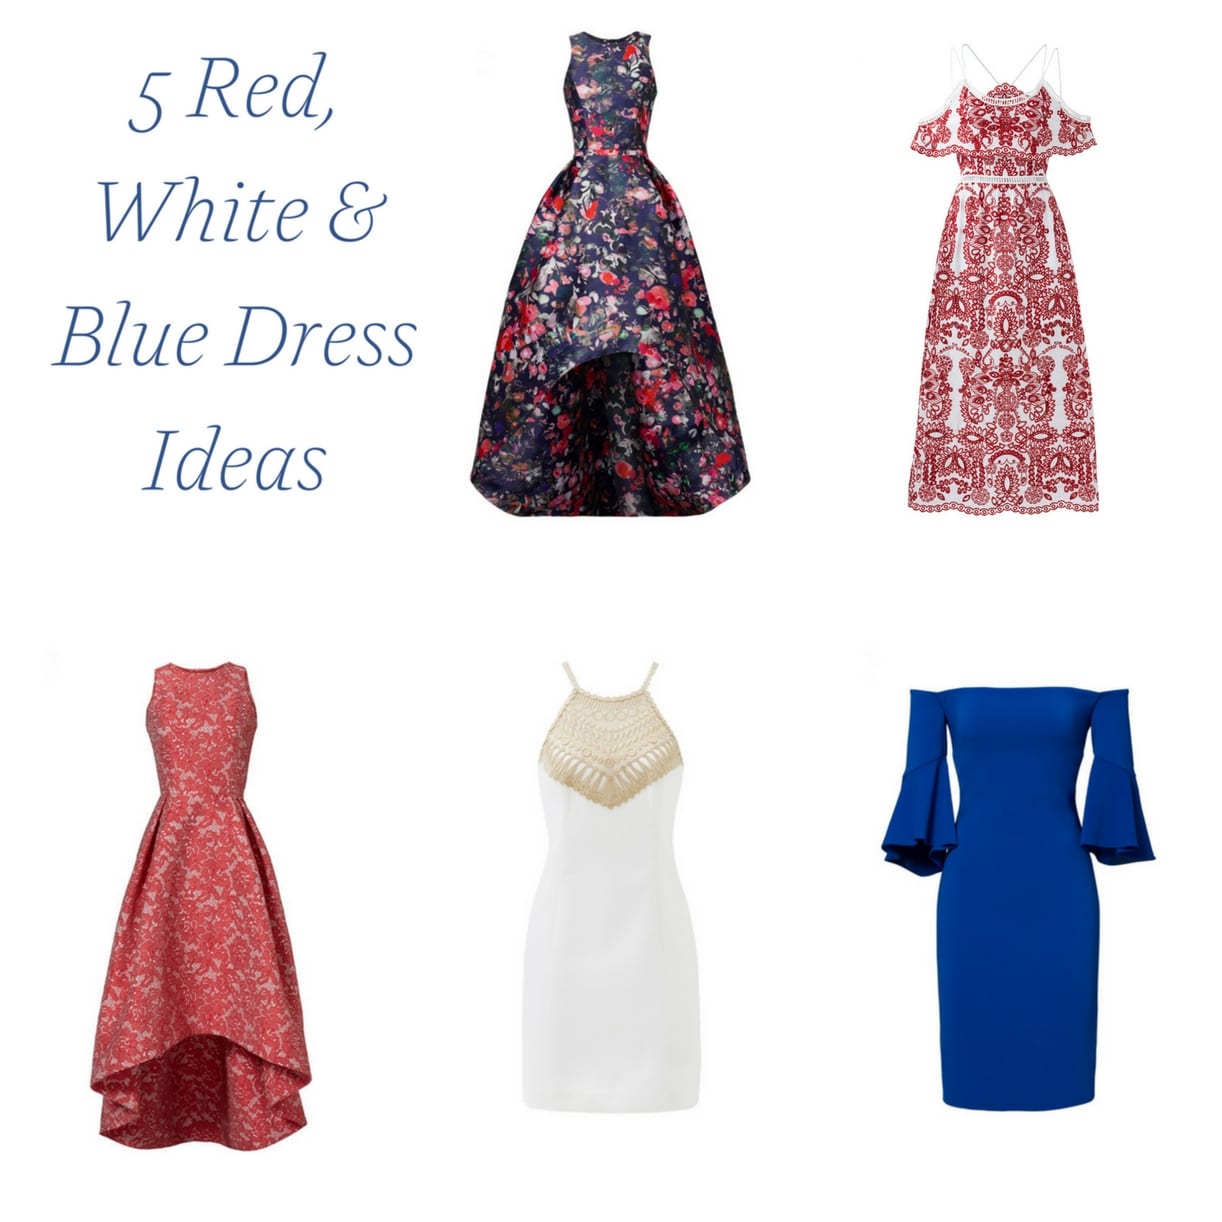 5 Red White and Blue Dress Ideas to Rent from Rent the Runway as seen on Hill City Bride Virginia Wedding Blog